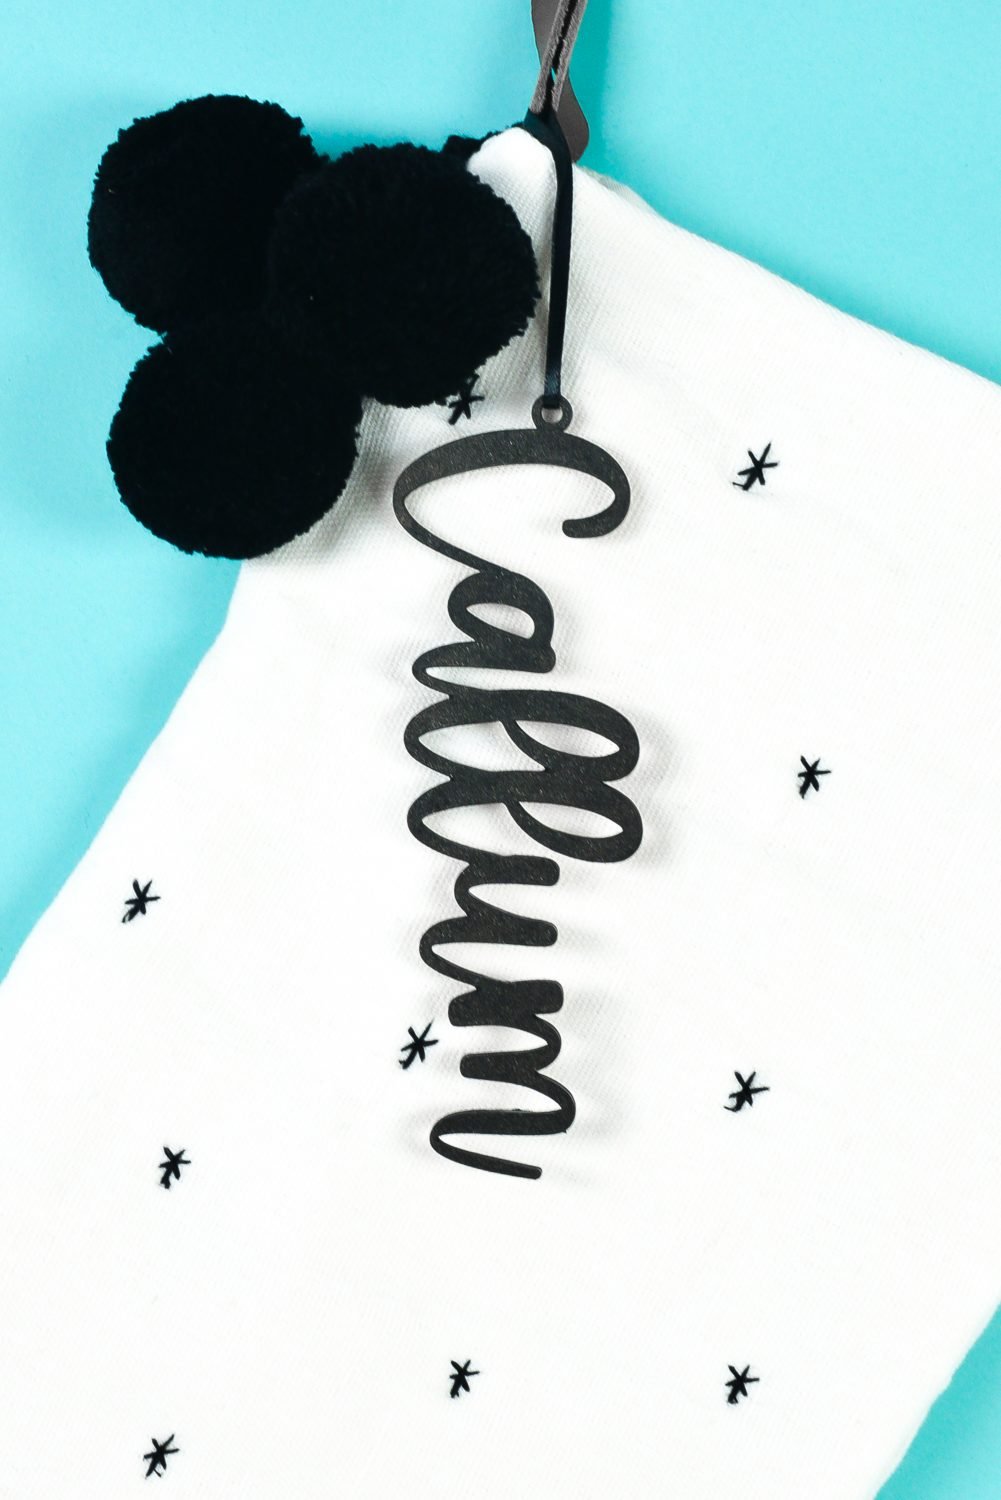 White stocking with black "Callum" personalized stocking tag on teal background